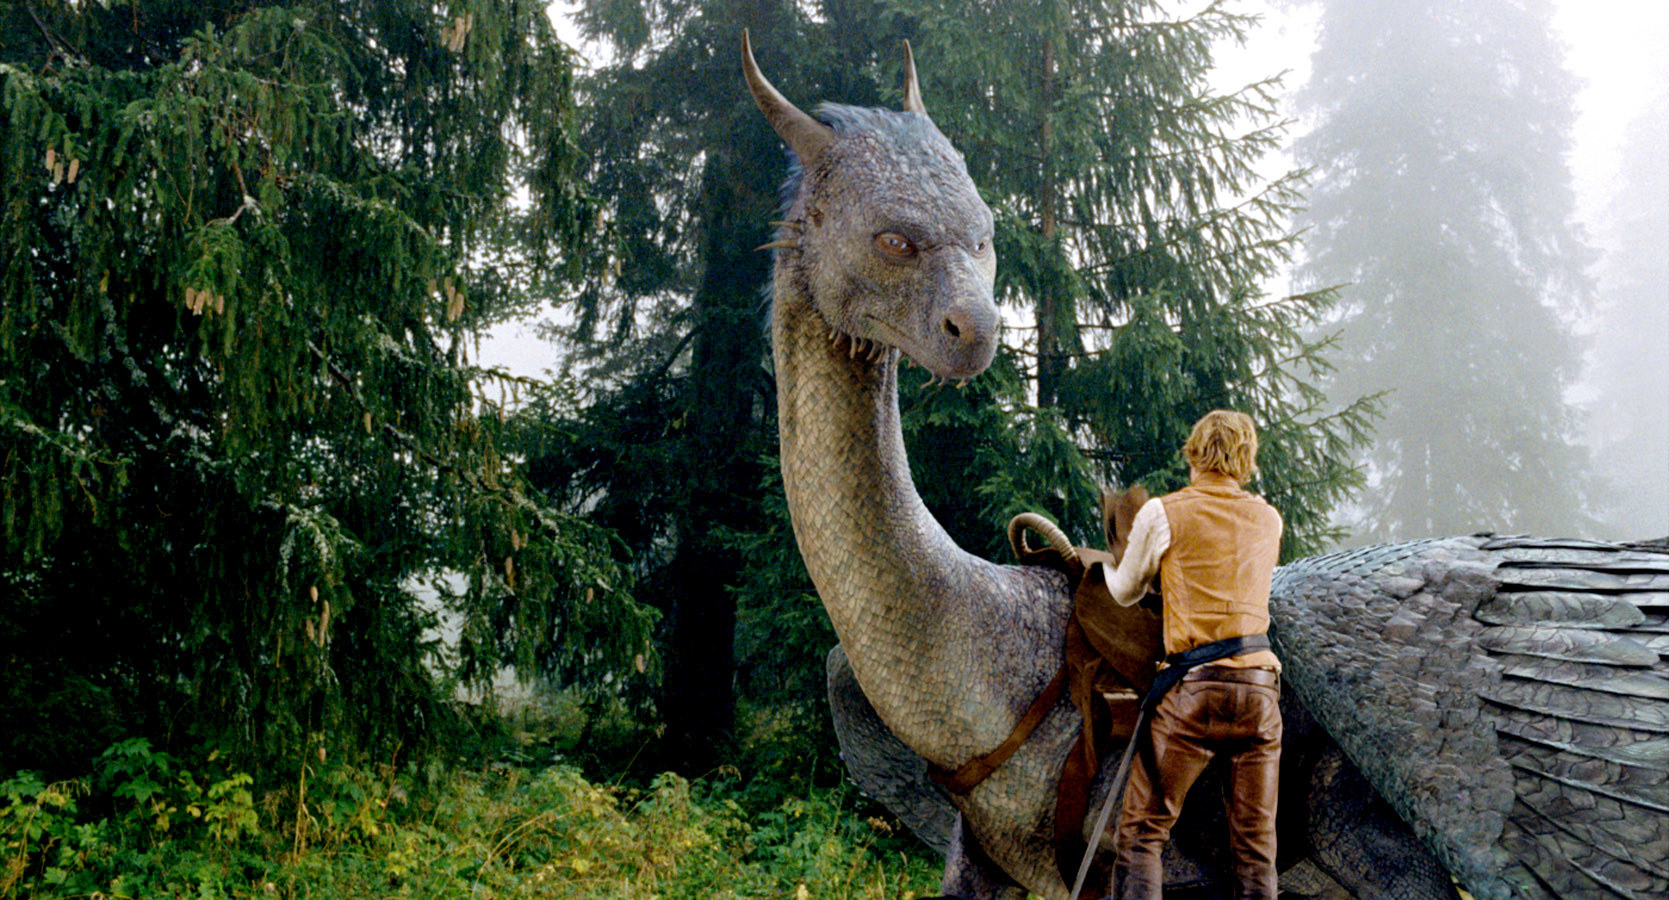 Edward Speleers putting a saddle on a dragon